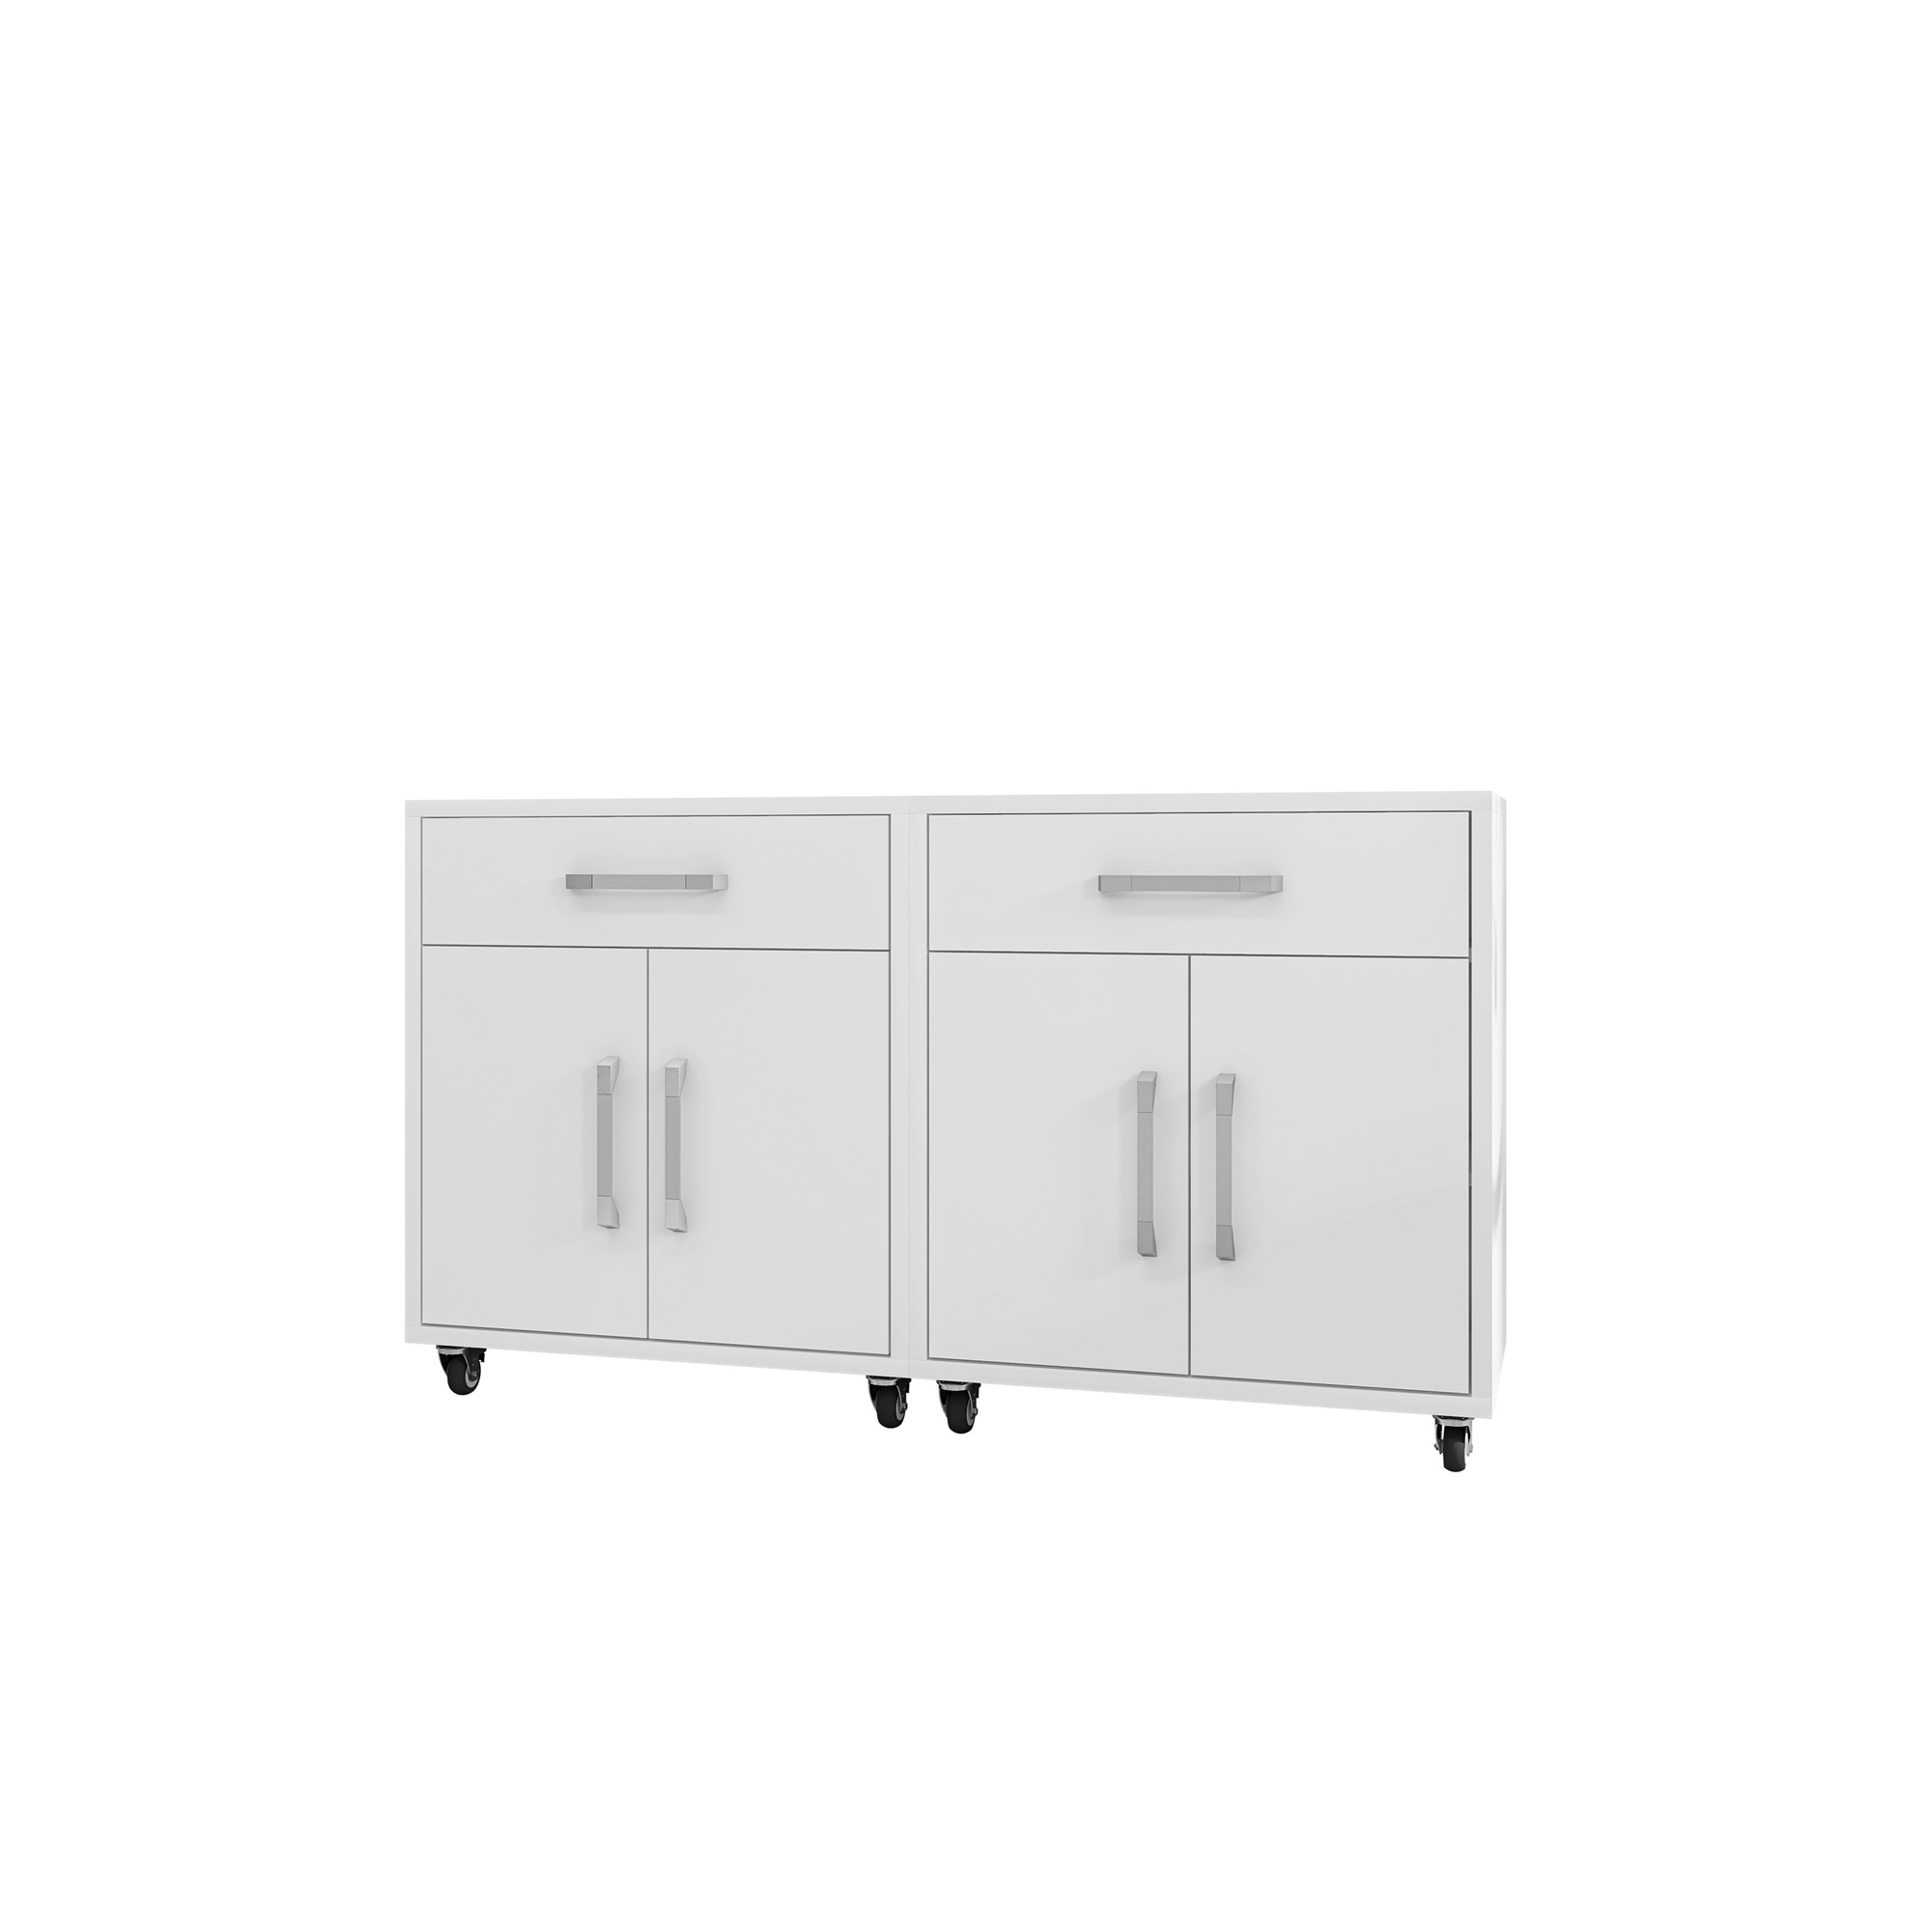 Manhattan Comfort, Eiffel Mobile Garage Cabinet in White Set of 2 Height 34.41 in, Width 56.7 in, Color White, Model 2-252BMC